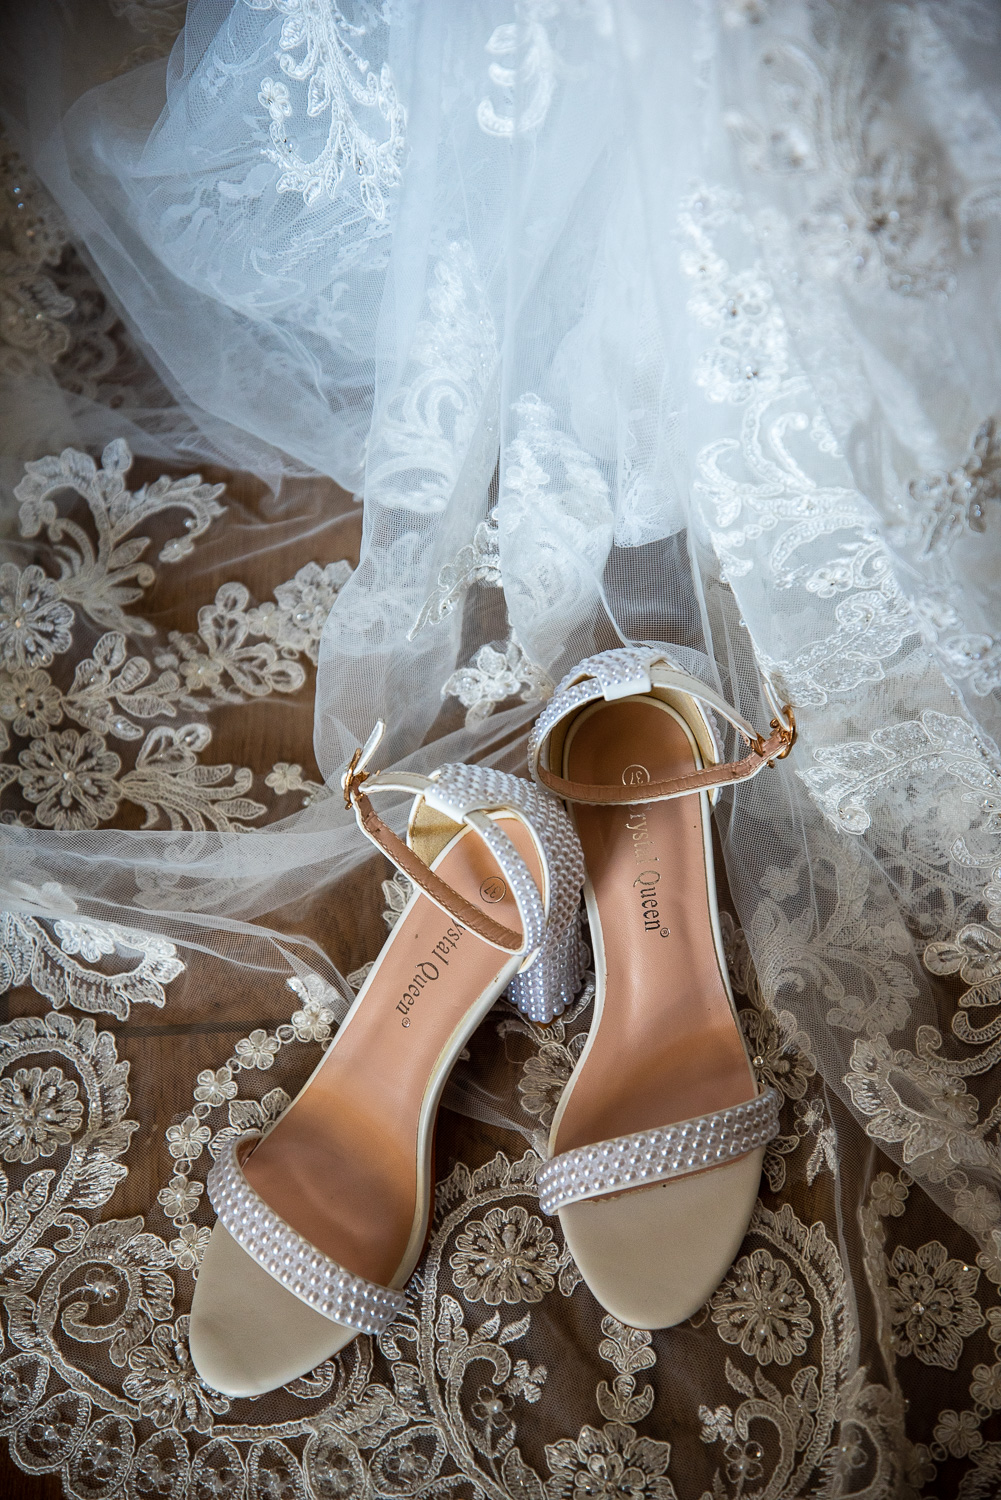 Brides shoes on the wedding dress